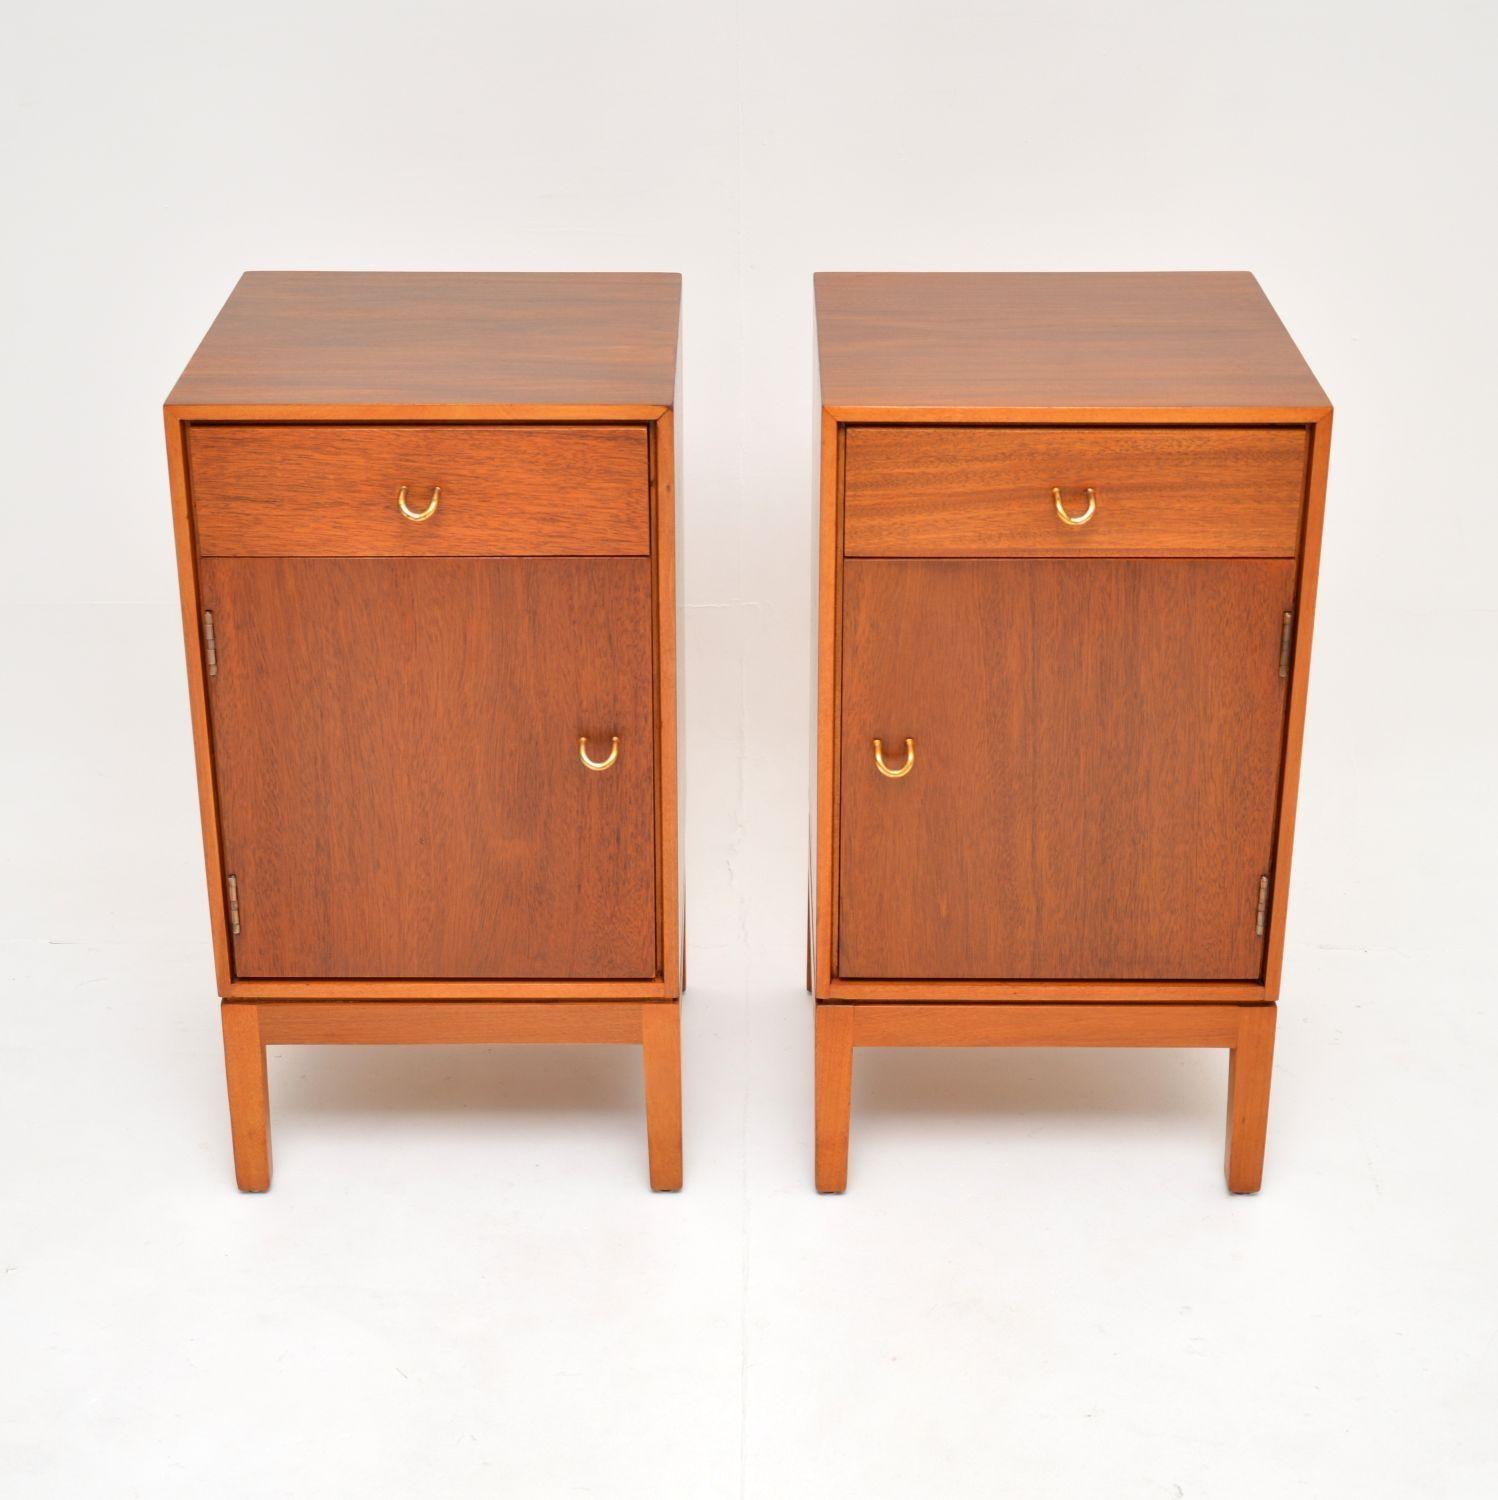 A very rare and stylish pair of vintage bedside cabinets by John & Sylvia Reid for Stag. They were made in England, they date from the 1950-60’s. The quality is outstanding.

We have recently had these stripped and re-polished to a very high